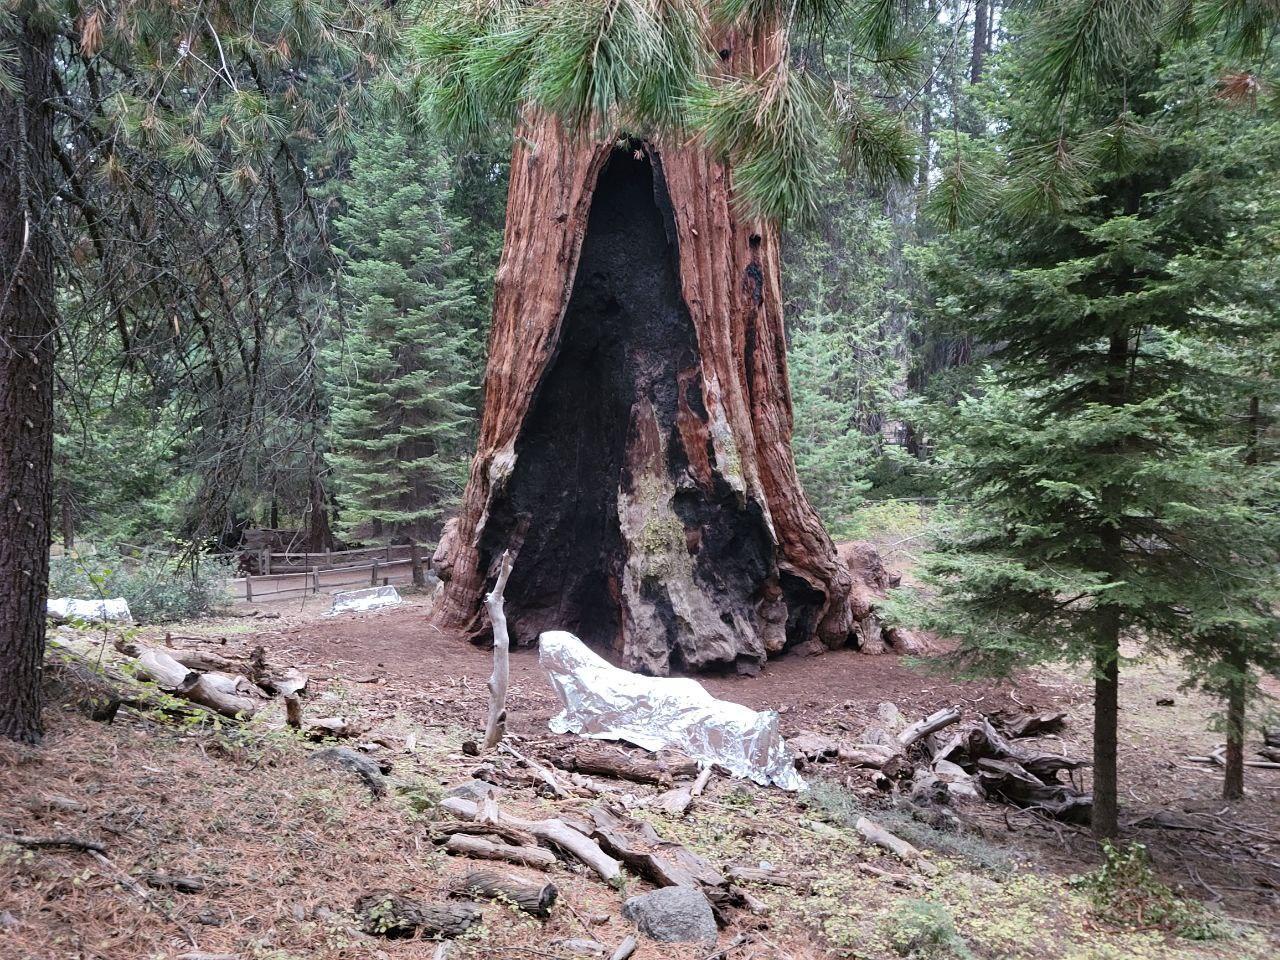 A massive reddish tree, General Grant, stands in a clearing with a large black fire scar behind a small wrapped object